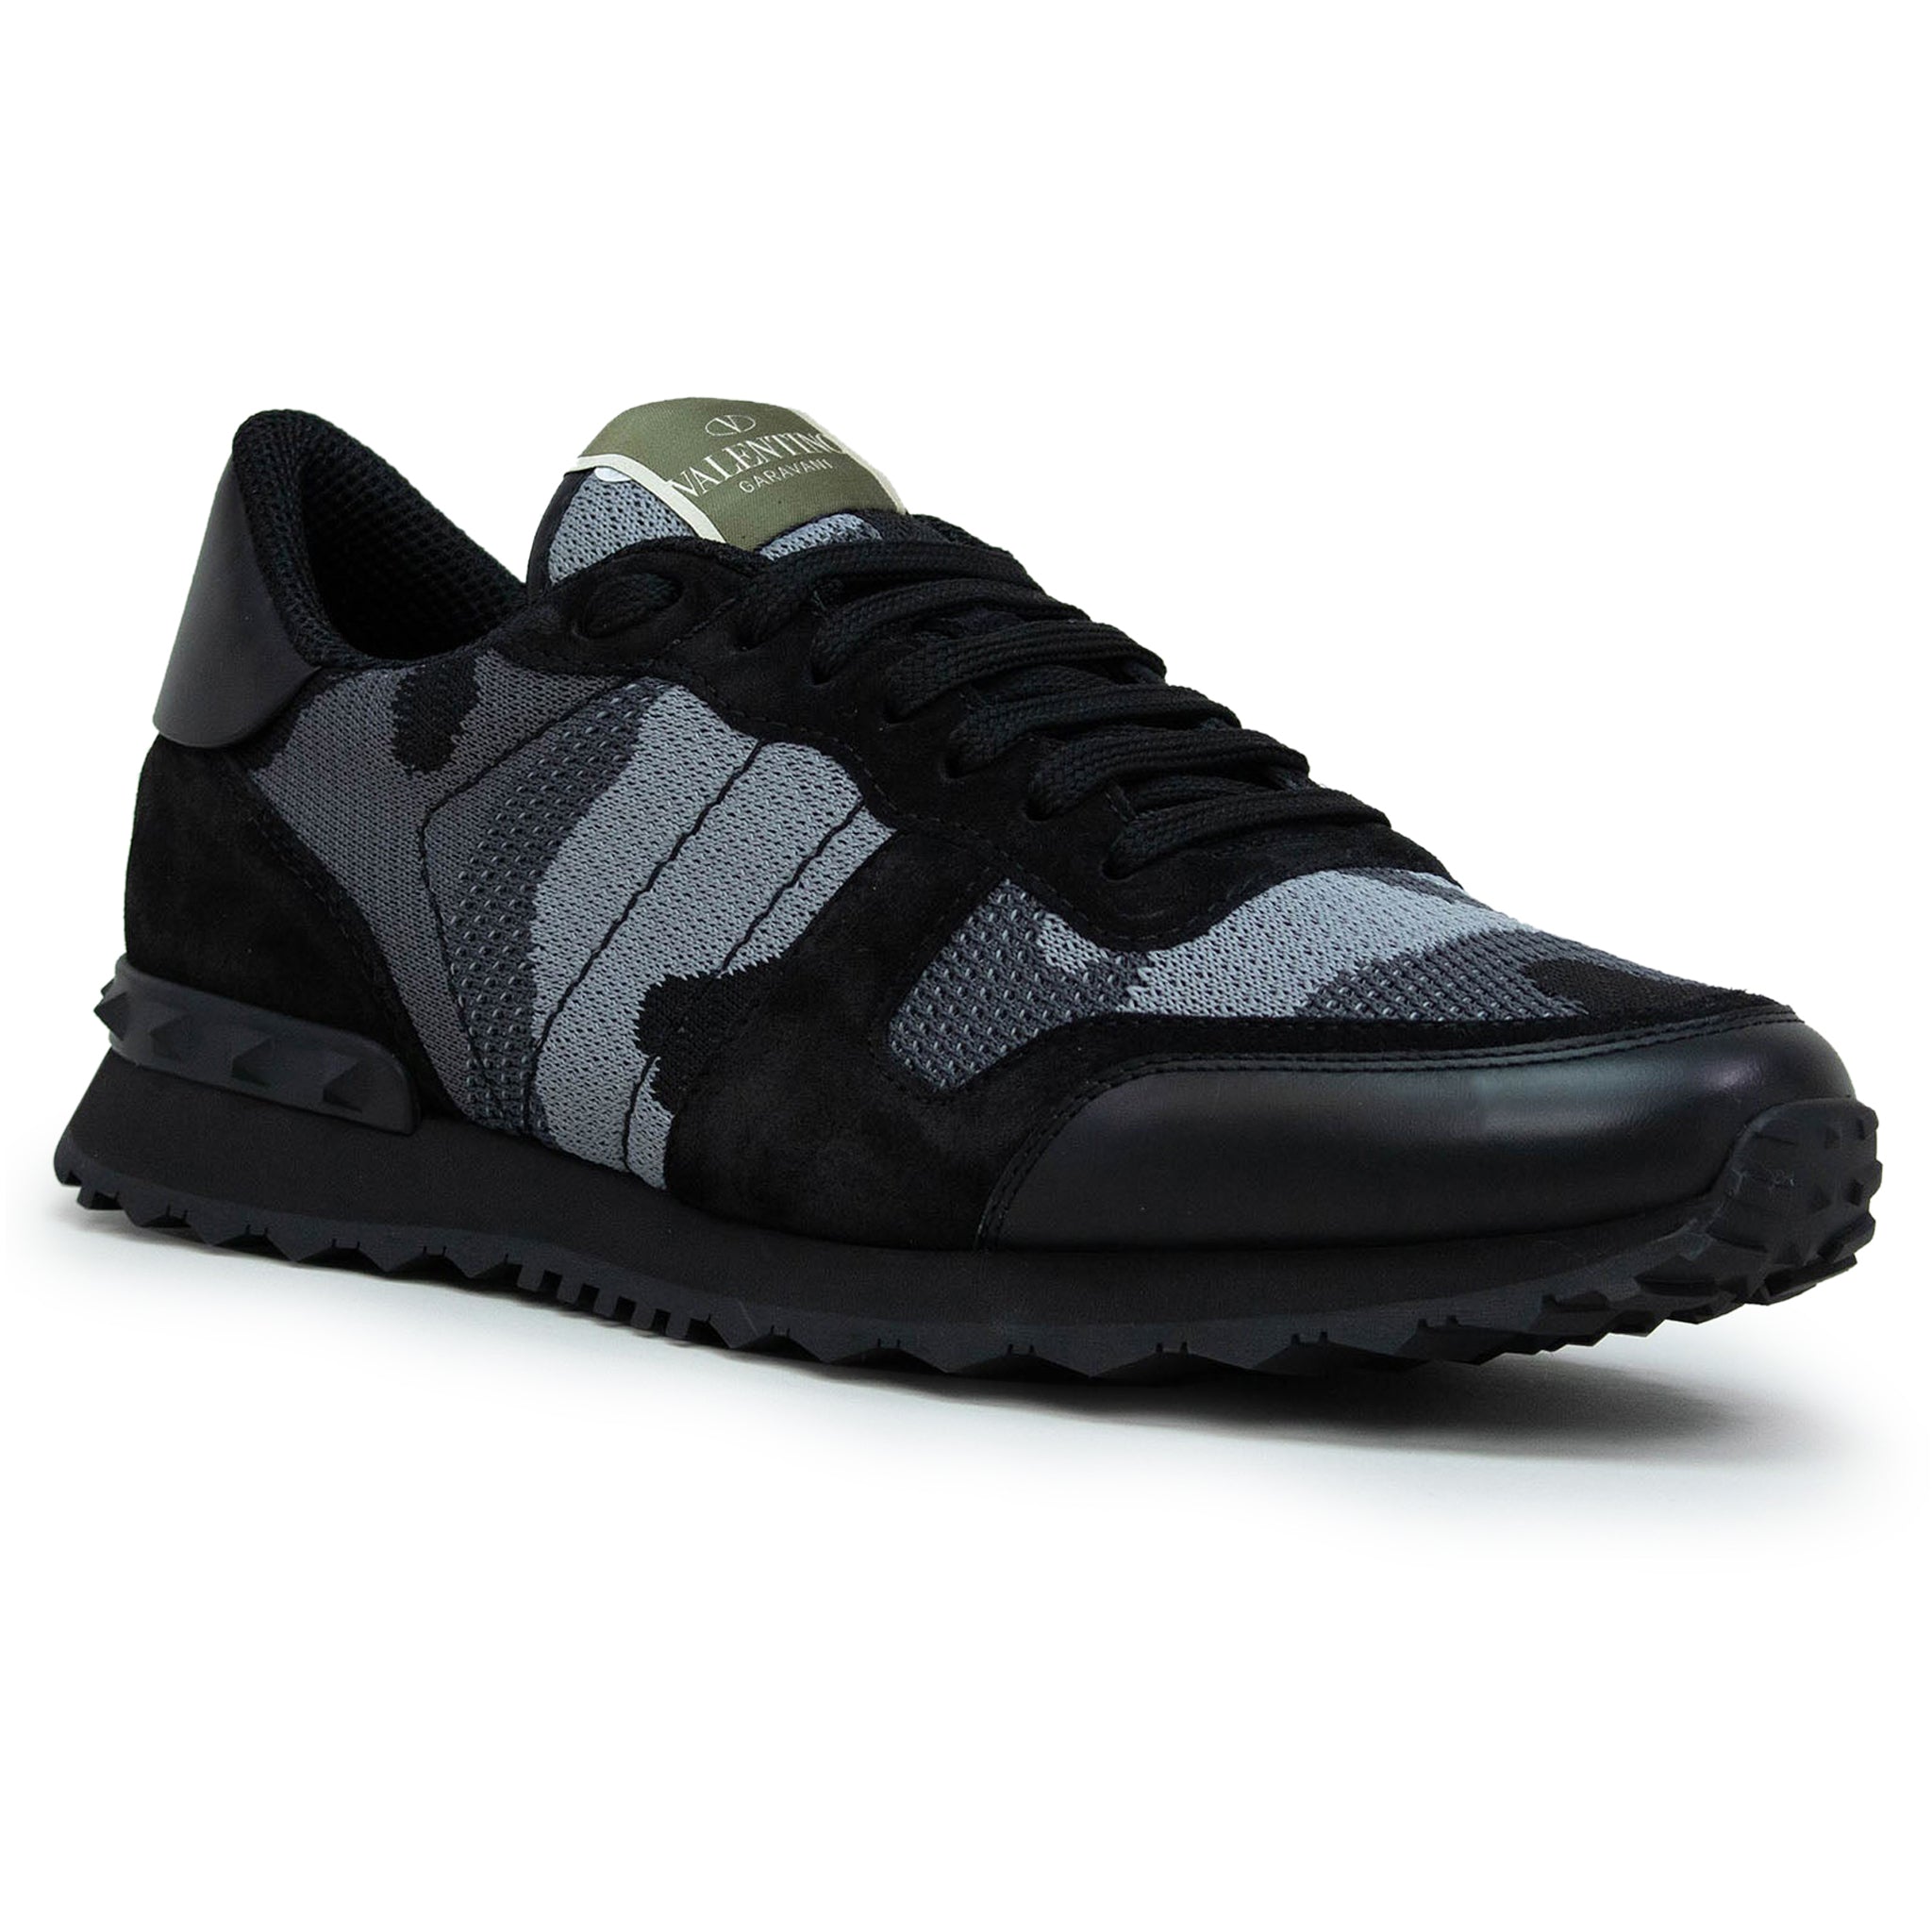 Image of Trapeze valentino Rockrunner Camouflage Black Mesh Sneaker